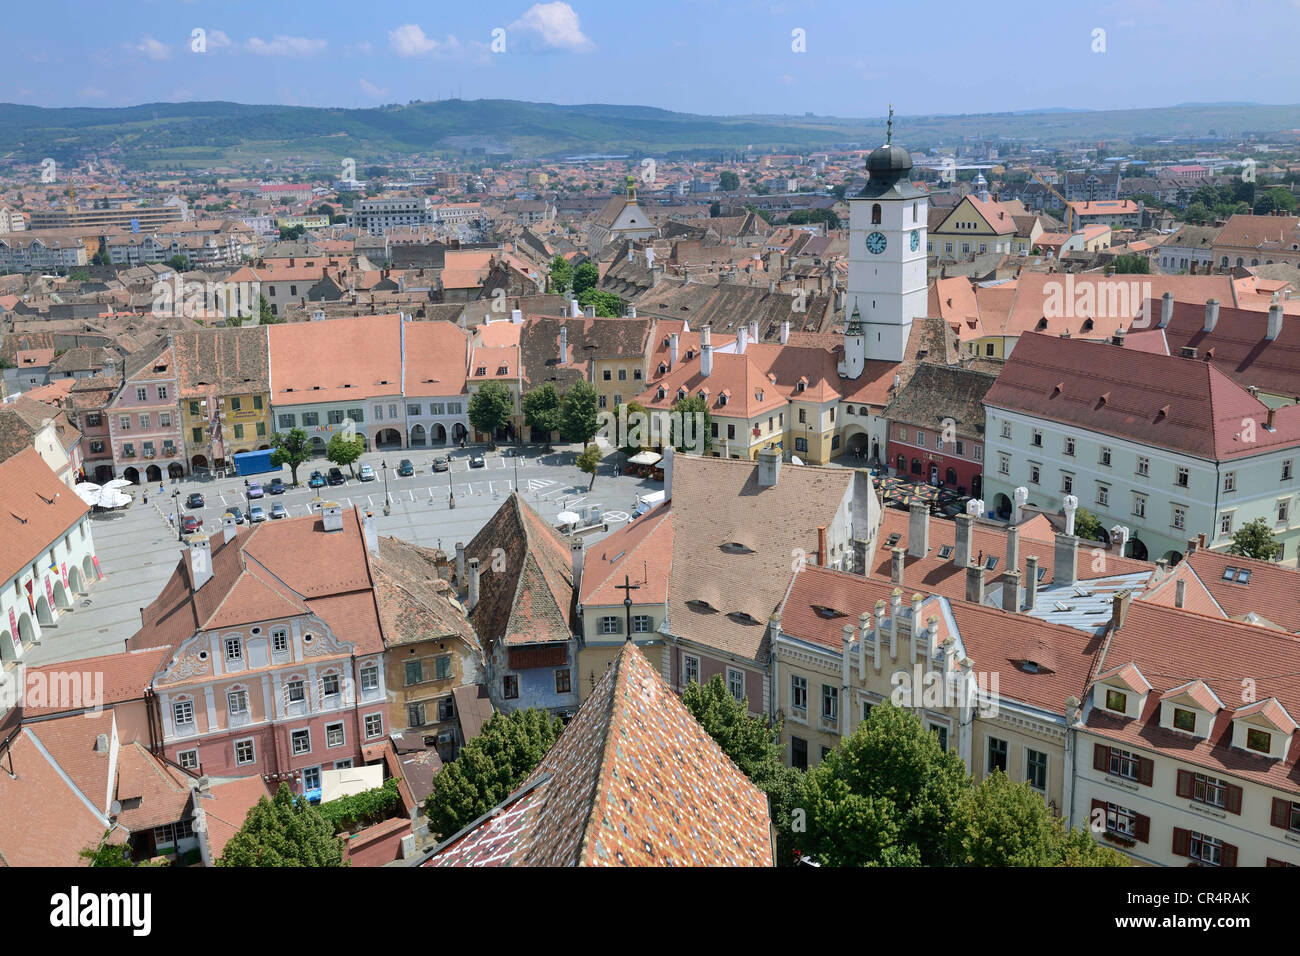 View from the tower of the Protestant church on the old town with old tower of the town hall, old town, Sibiu, Romania, Europe Stock Photo